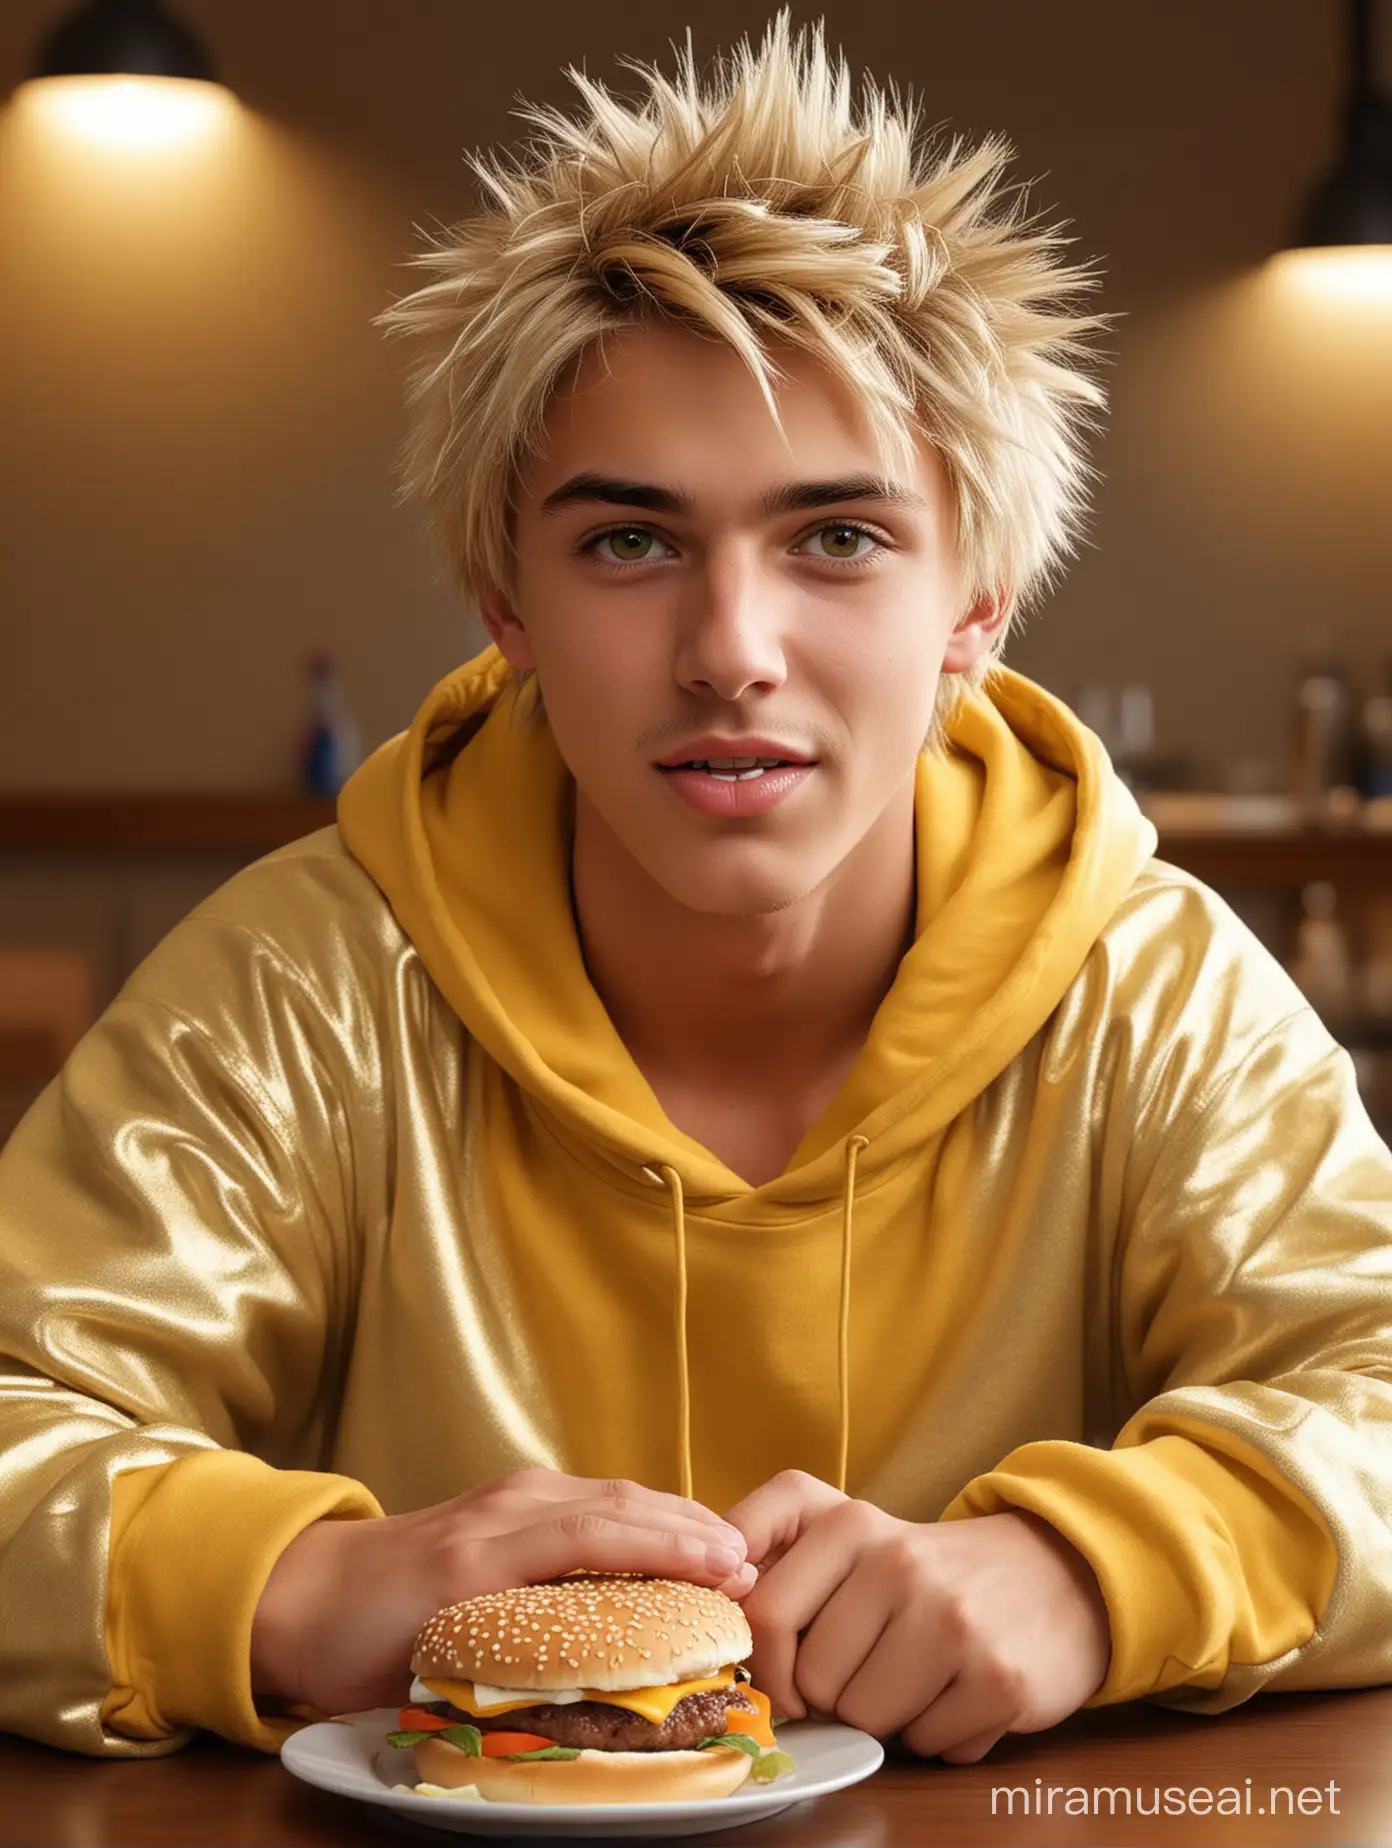 blond Very handsome,,boy,boy,17 years old,(beautiful vivid ocher-Brown eyes with 3D light reflection),back,athletic figure, ,detailed hands And fingers,tanned,blonde hair,athlete,golden blonde short cut with spiky hair  , dressed in a yellow hooded sweatshirt and sitting at a table in Donald's MČ, holding a hamburger in his hand and about to bite into it, with his mouth wide open,